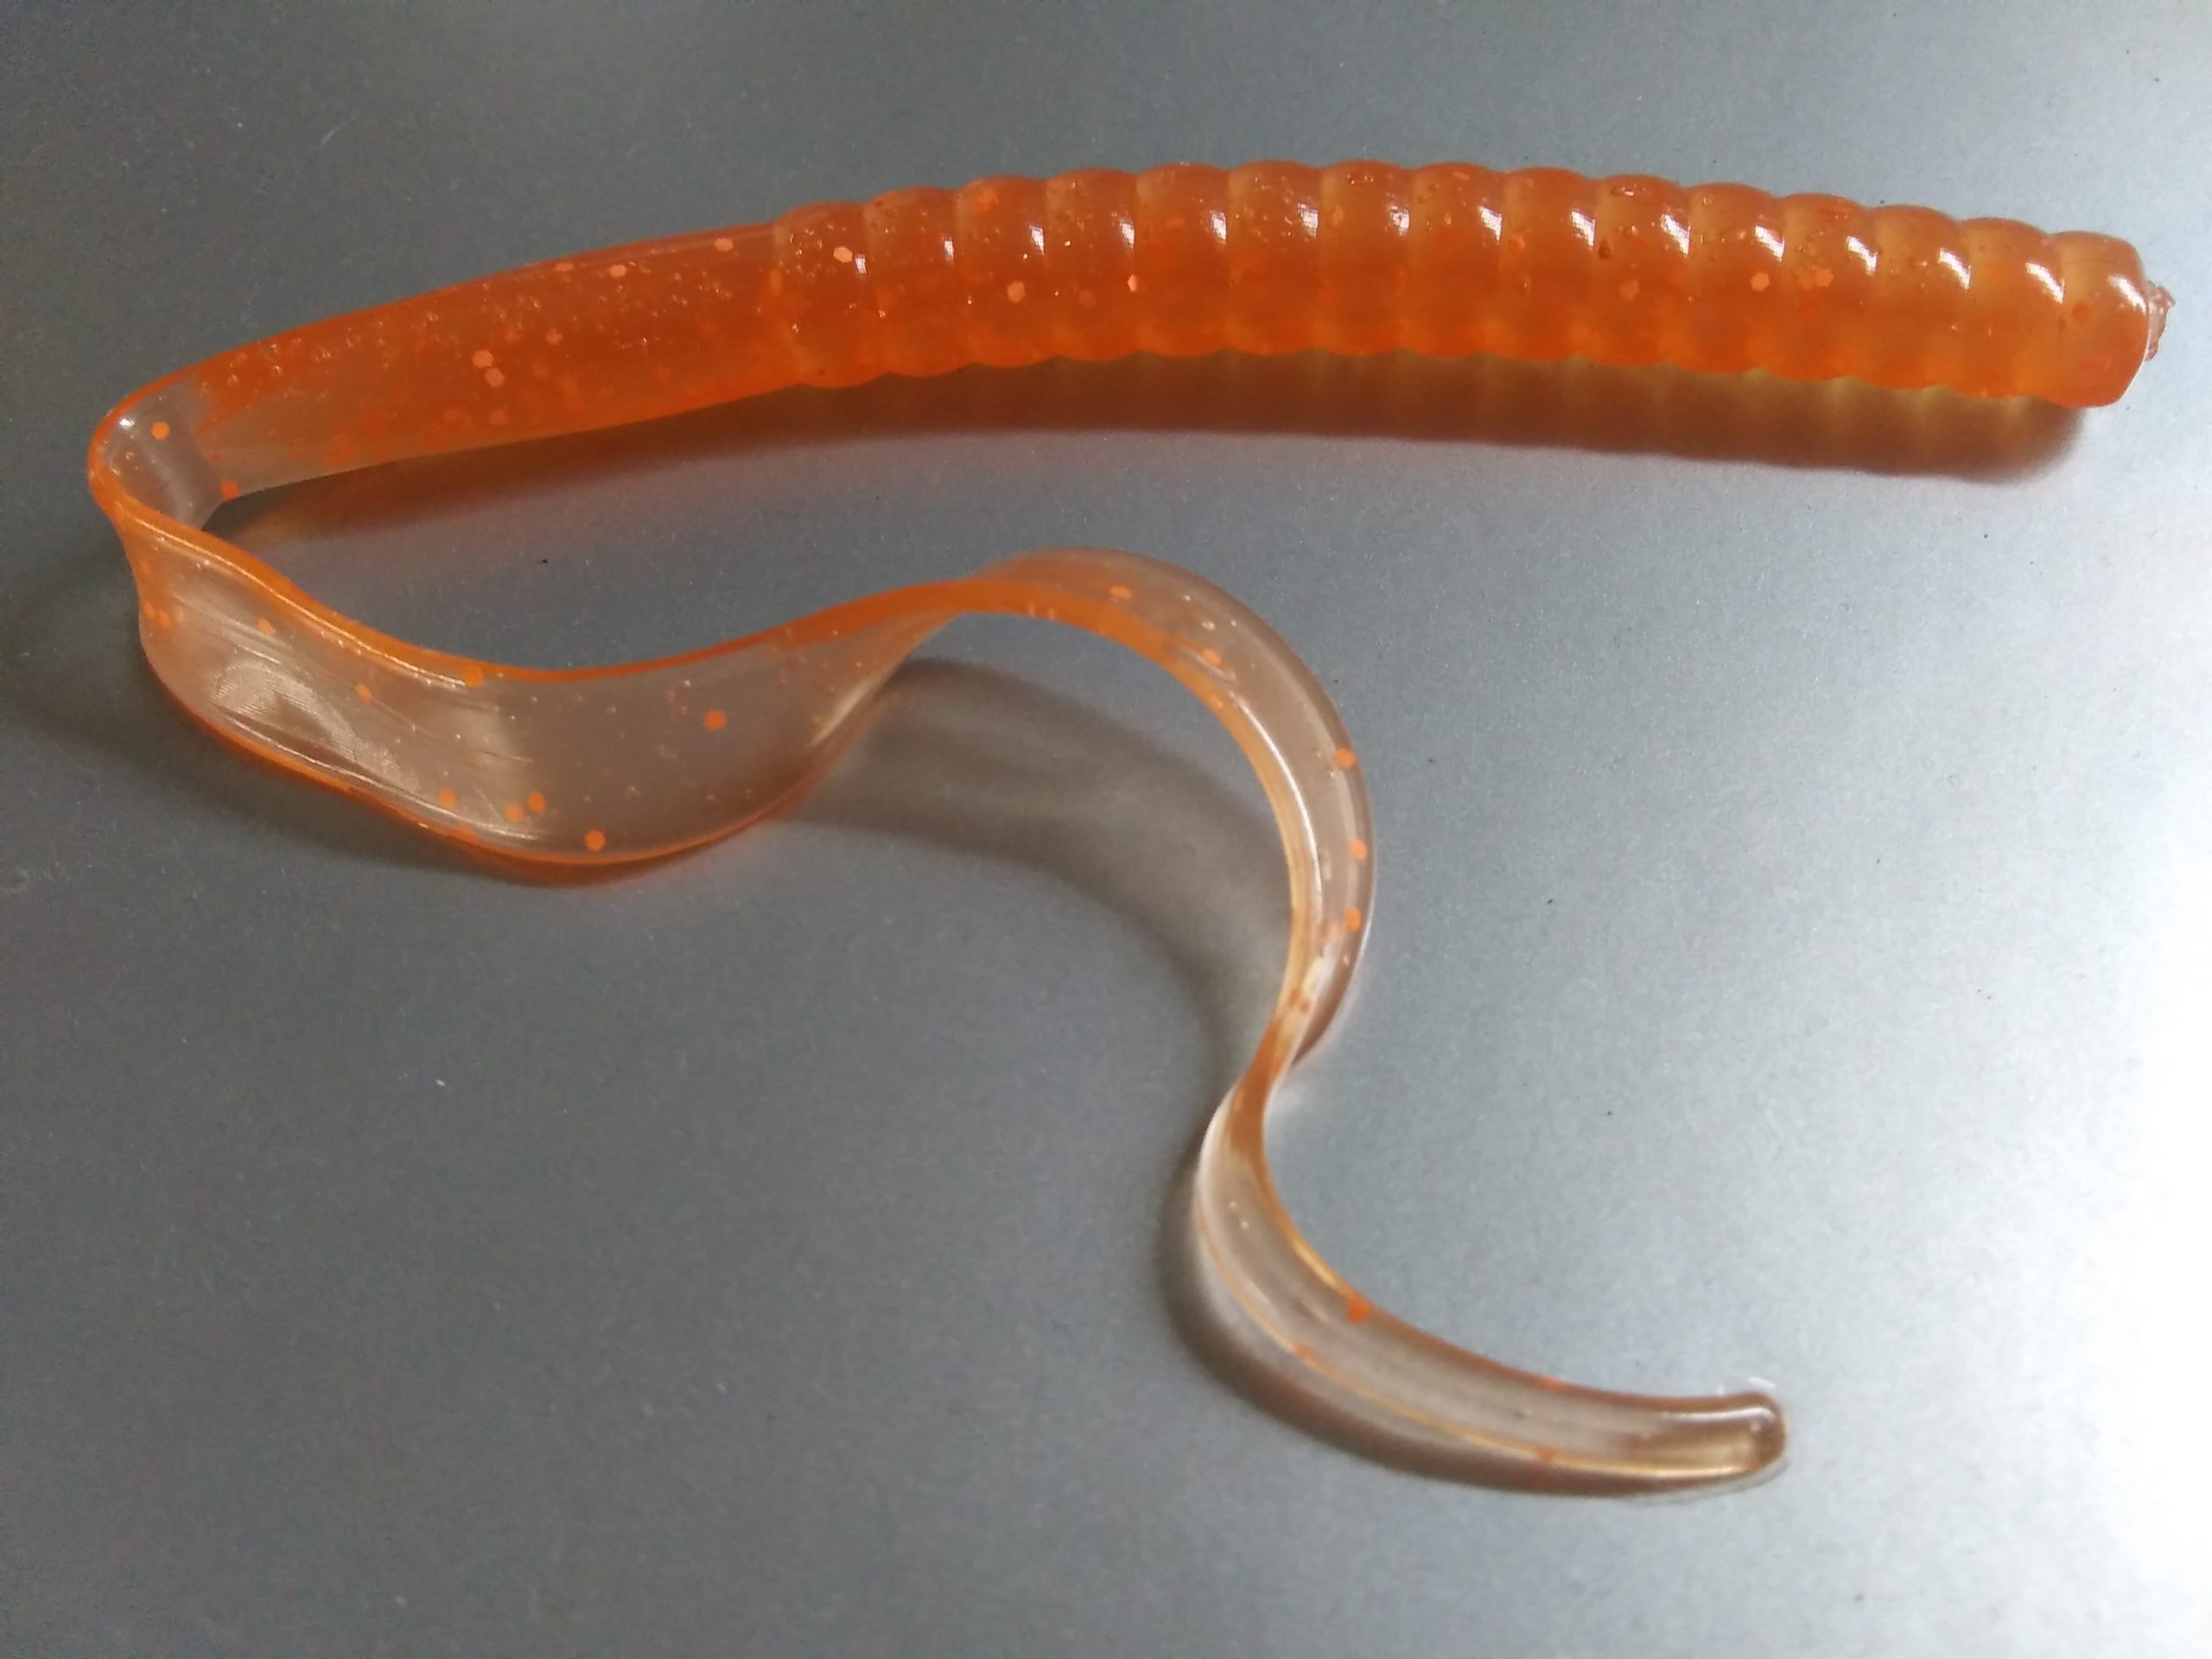 10 Inch ribbon tail soft bait with a flat back side. We call this The  Culler - Get Hooked Magic Baits